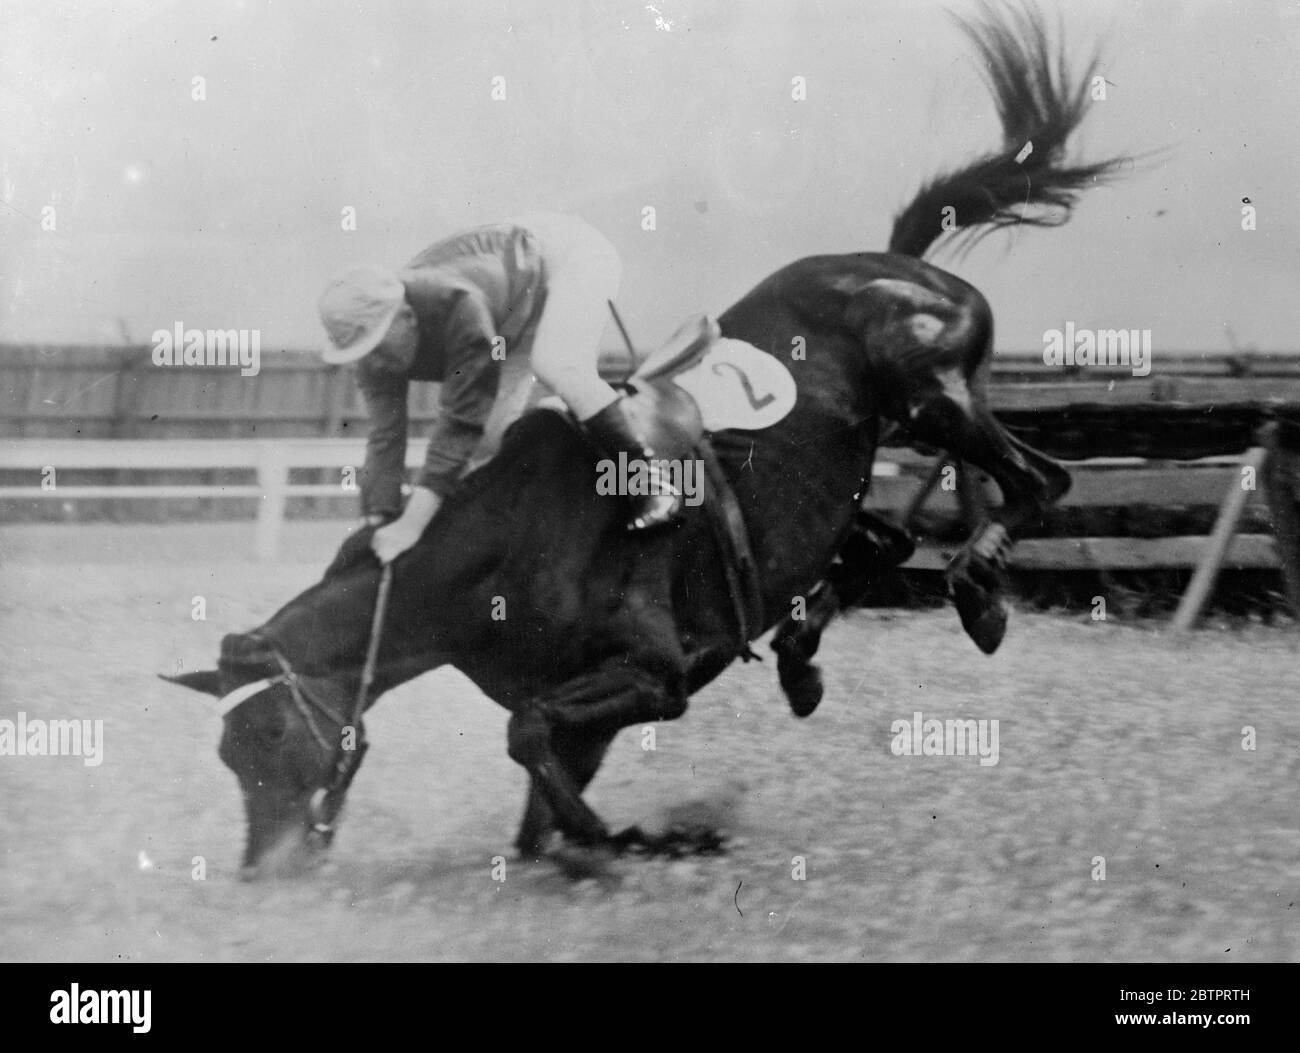 Biting the dust!. An amazing picture made as Tezpur Fore legs crumpled beneath him and nose buried in the turf, hits the ground in a head-on crash after taking a hurdle in the steeplechase at Williamstown, near Melbourne, Australia. The jockey, K Bracken, is about her two over the head of his fallan mount. 4 December 1937 Stock Photo